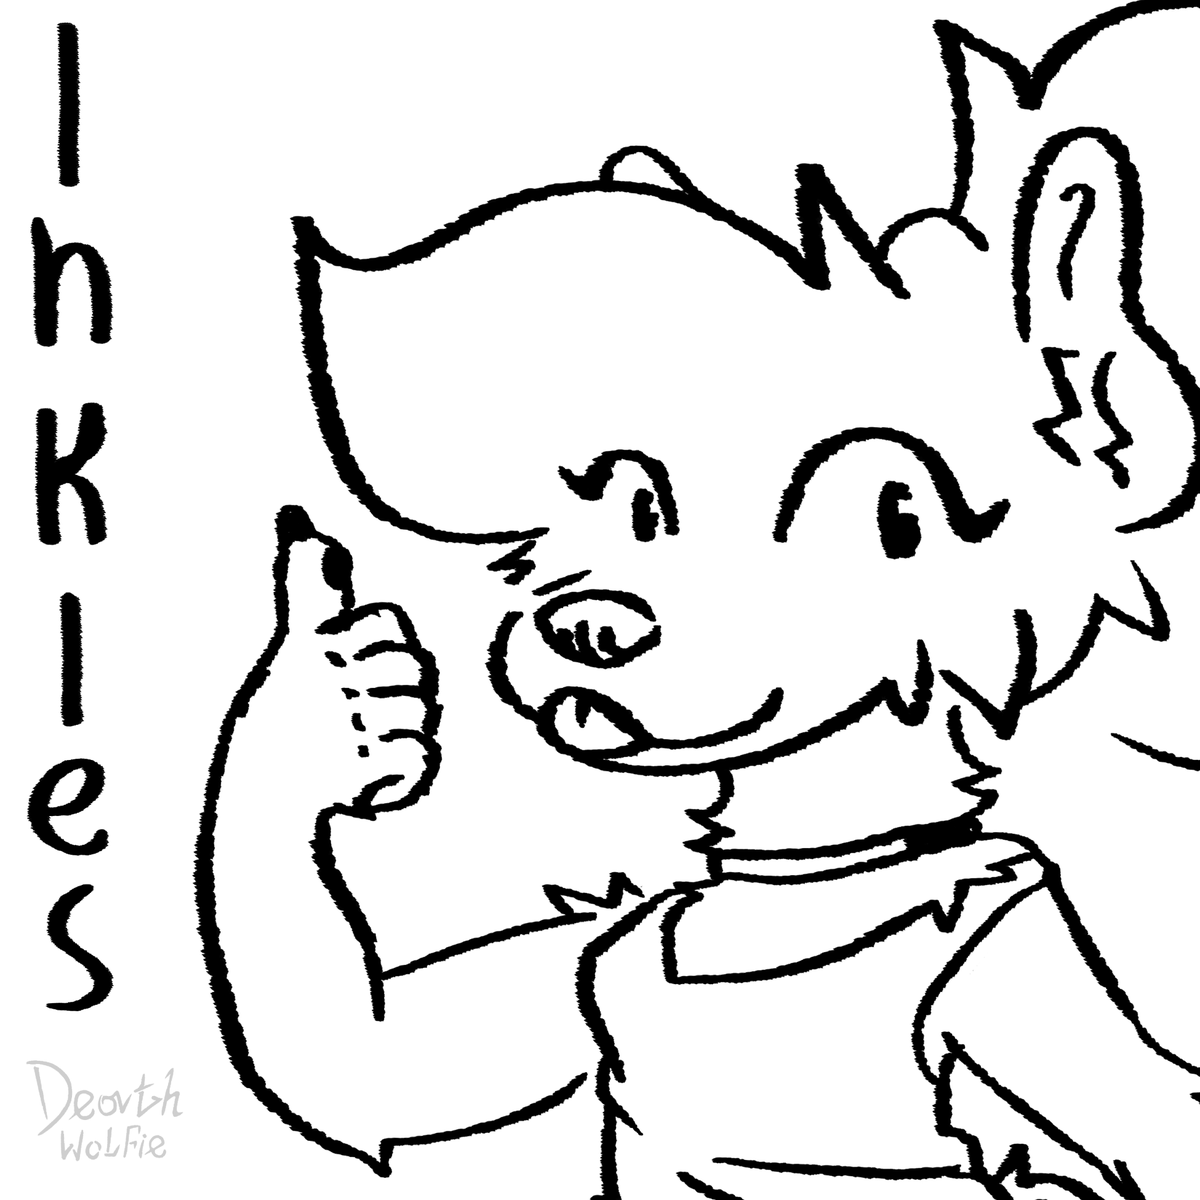 Heya! I made my ink brushpen into 2 free Clip Studio Paint brushes  c:

The pack's called 'Woofa's Inkie Brushpens' and its ID is 2023443